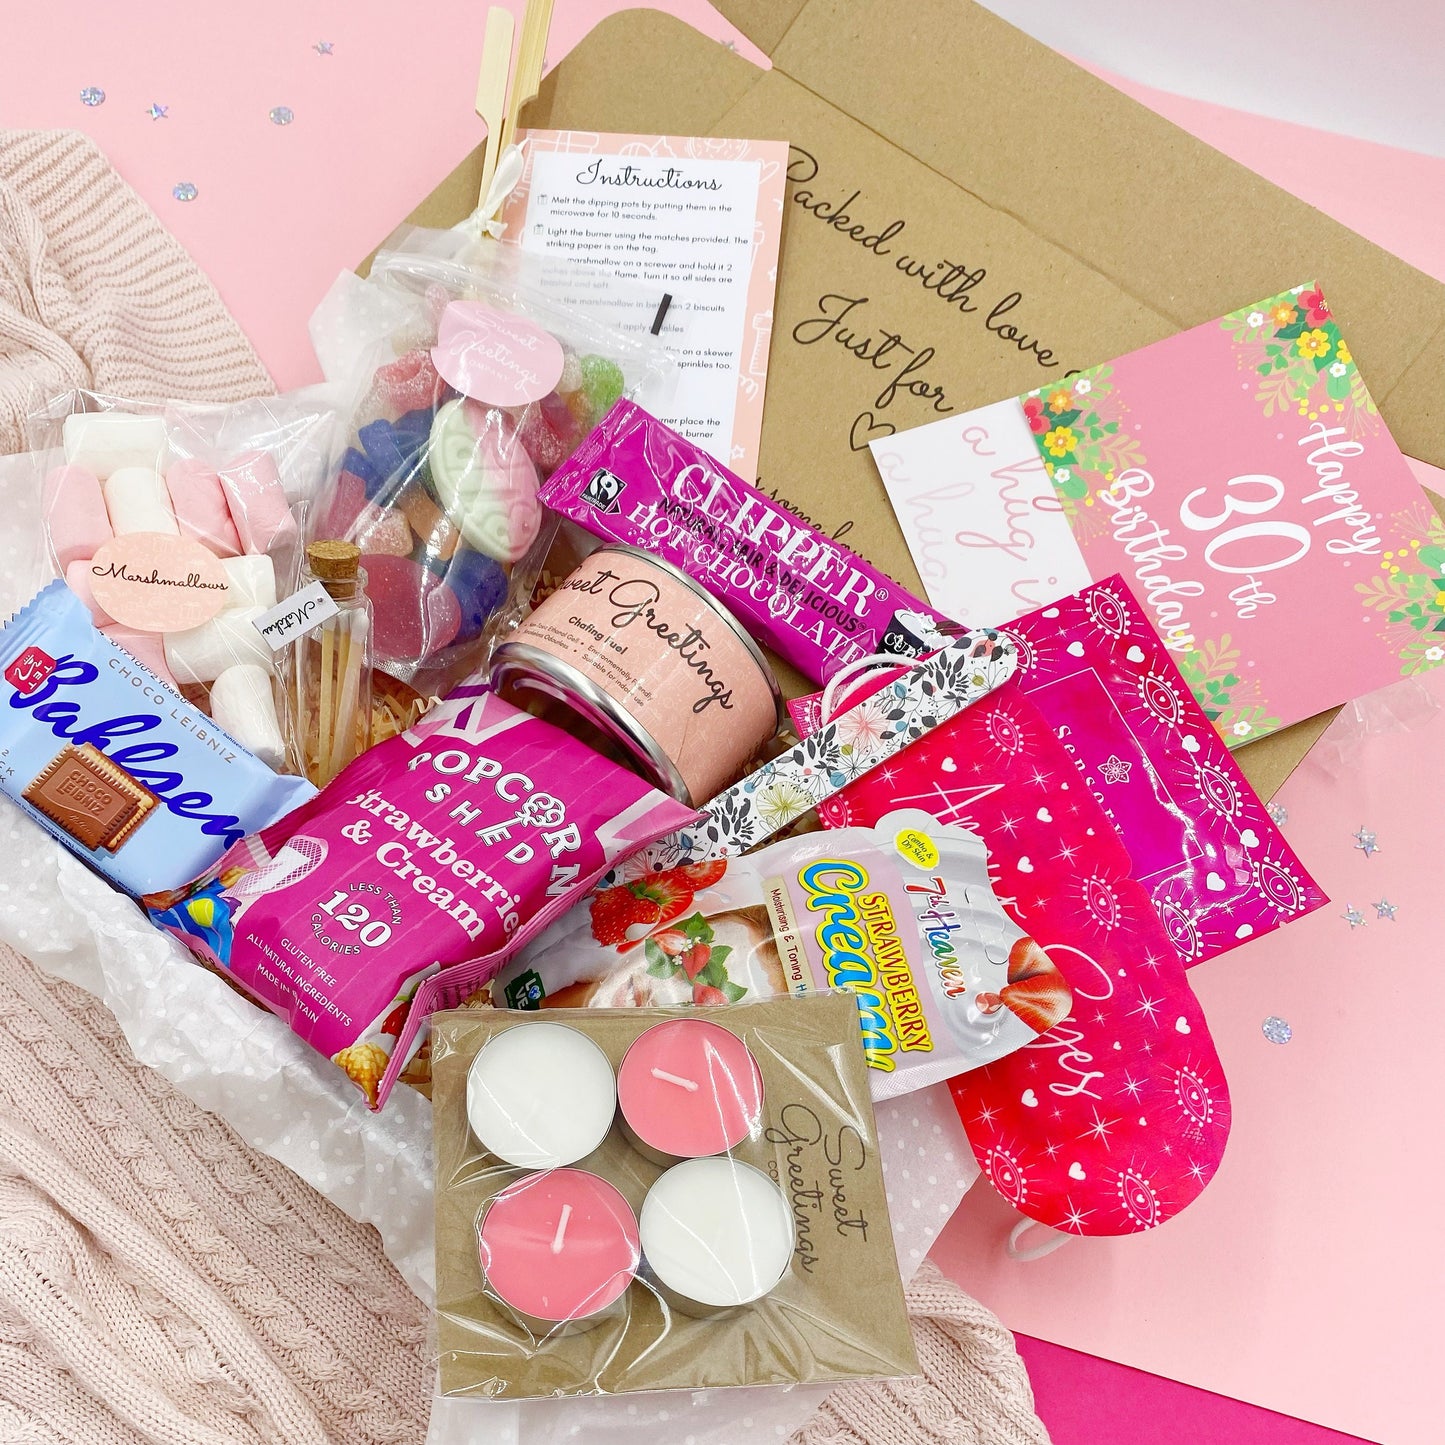 Ultimate Happy 30th Birthday Pink S'mores Gift box, Pamper Hamper, Spa Kit, Care Package, De Stress, Gift For Her, Present, Milestone, Smore